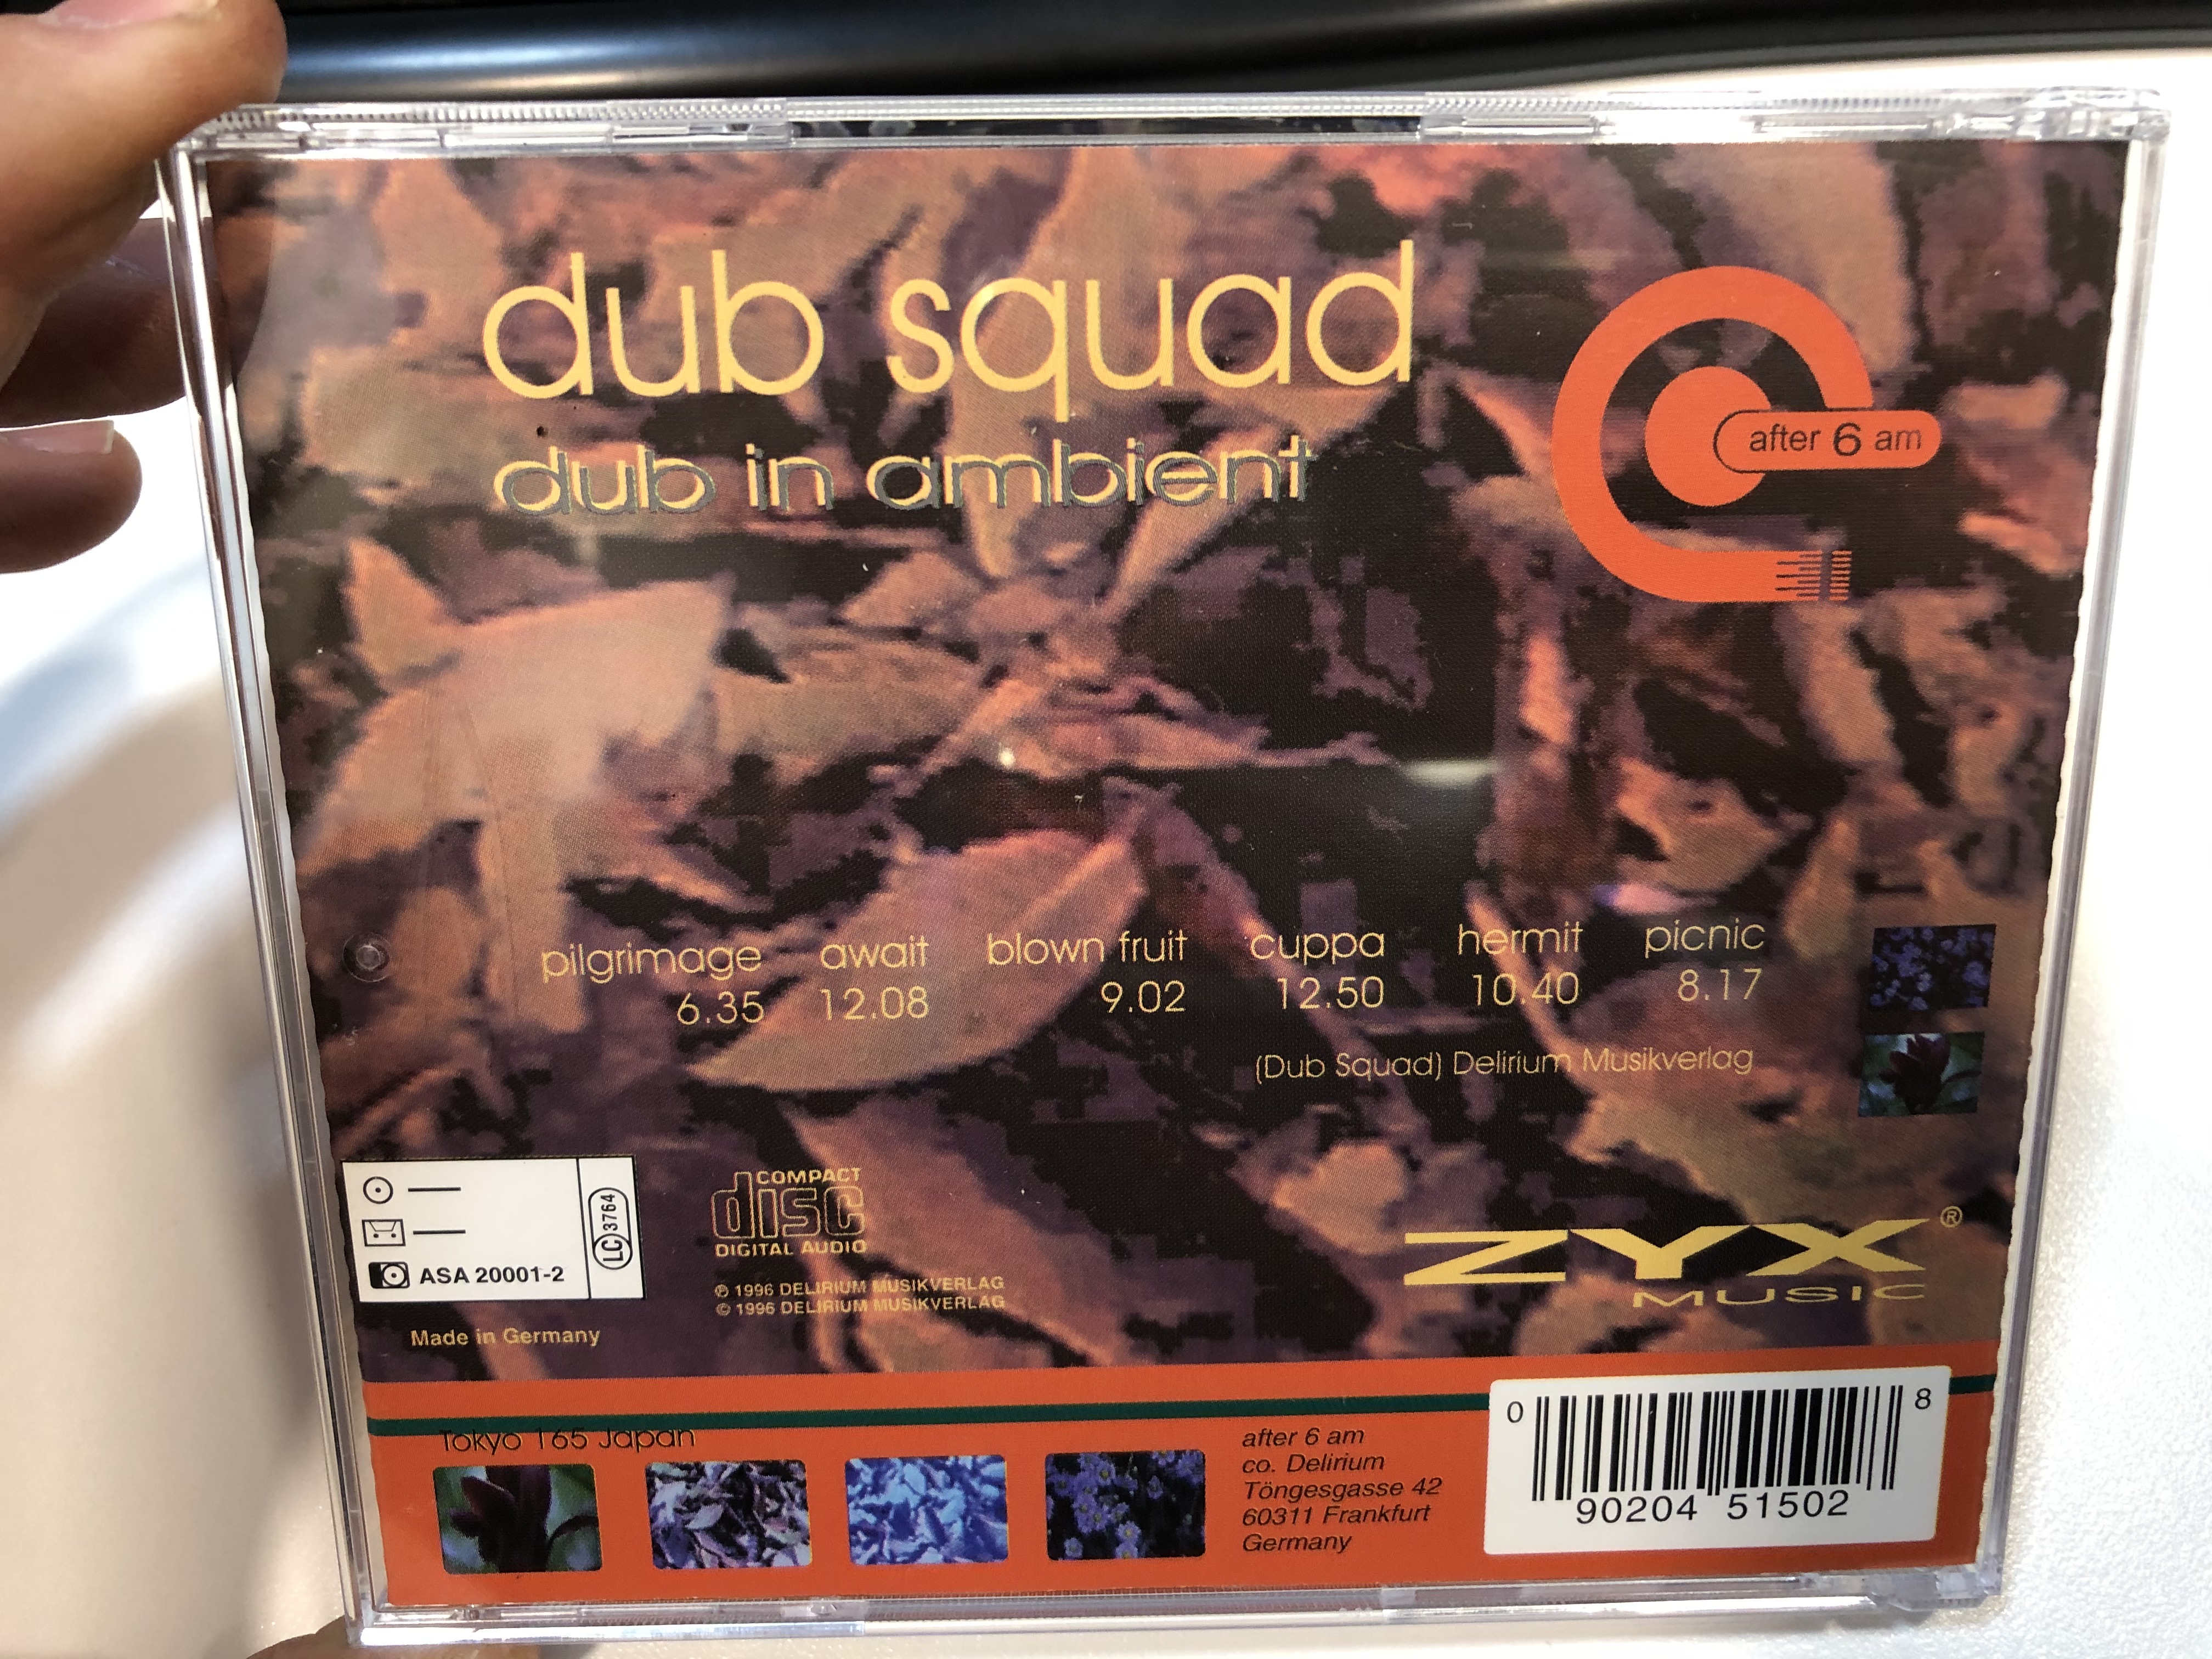 dub-in-ambient-dub-squad-after-6-am-audio-cd-1996-asa-20001-2-4-.jpg